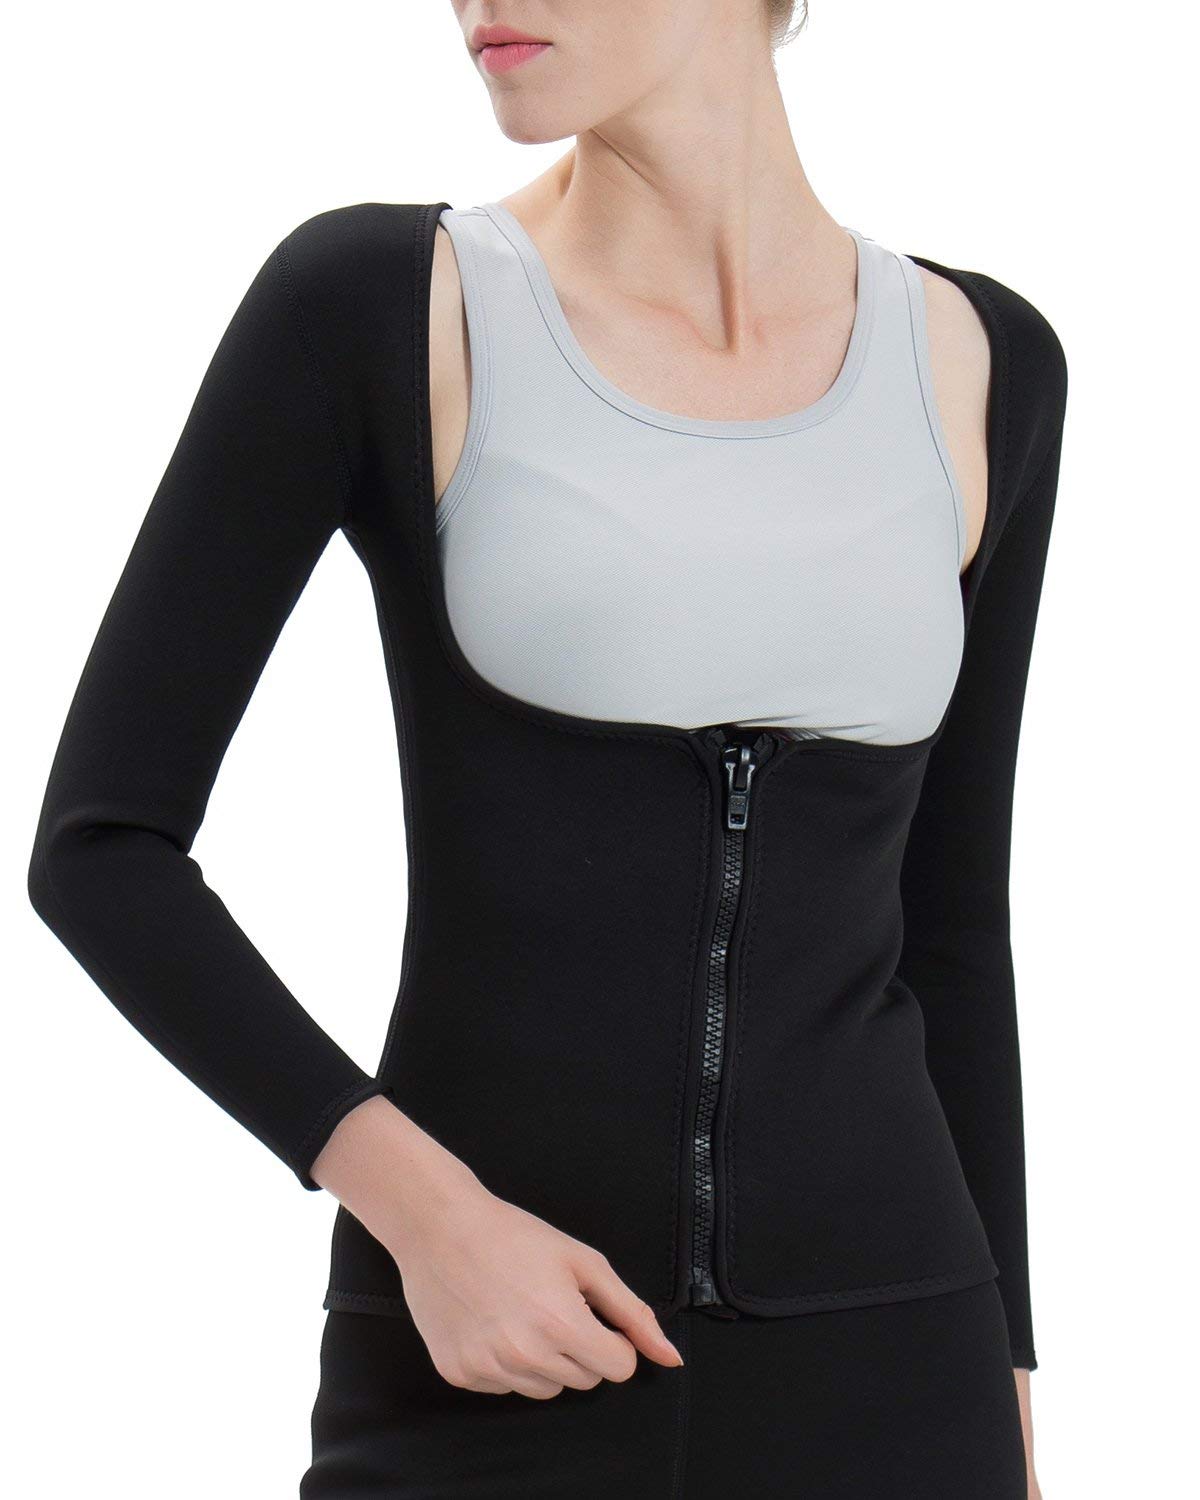 Top 10 Best Weighted Clothing in 2022 - Top Best Pro Review